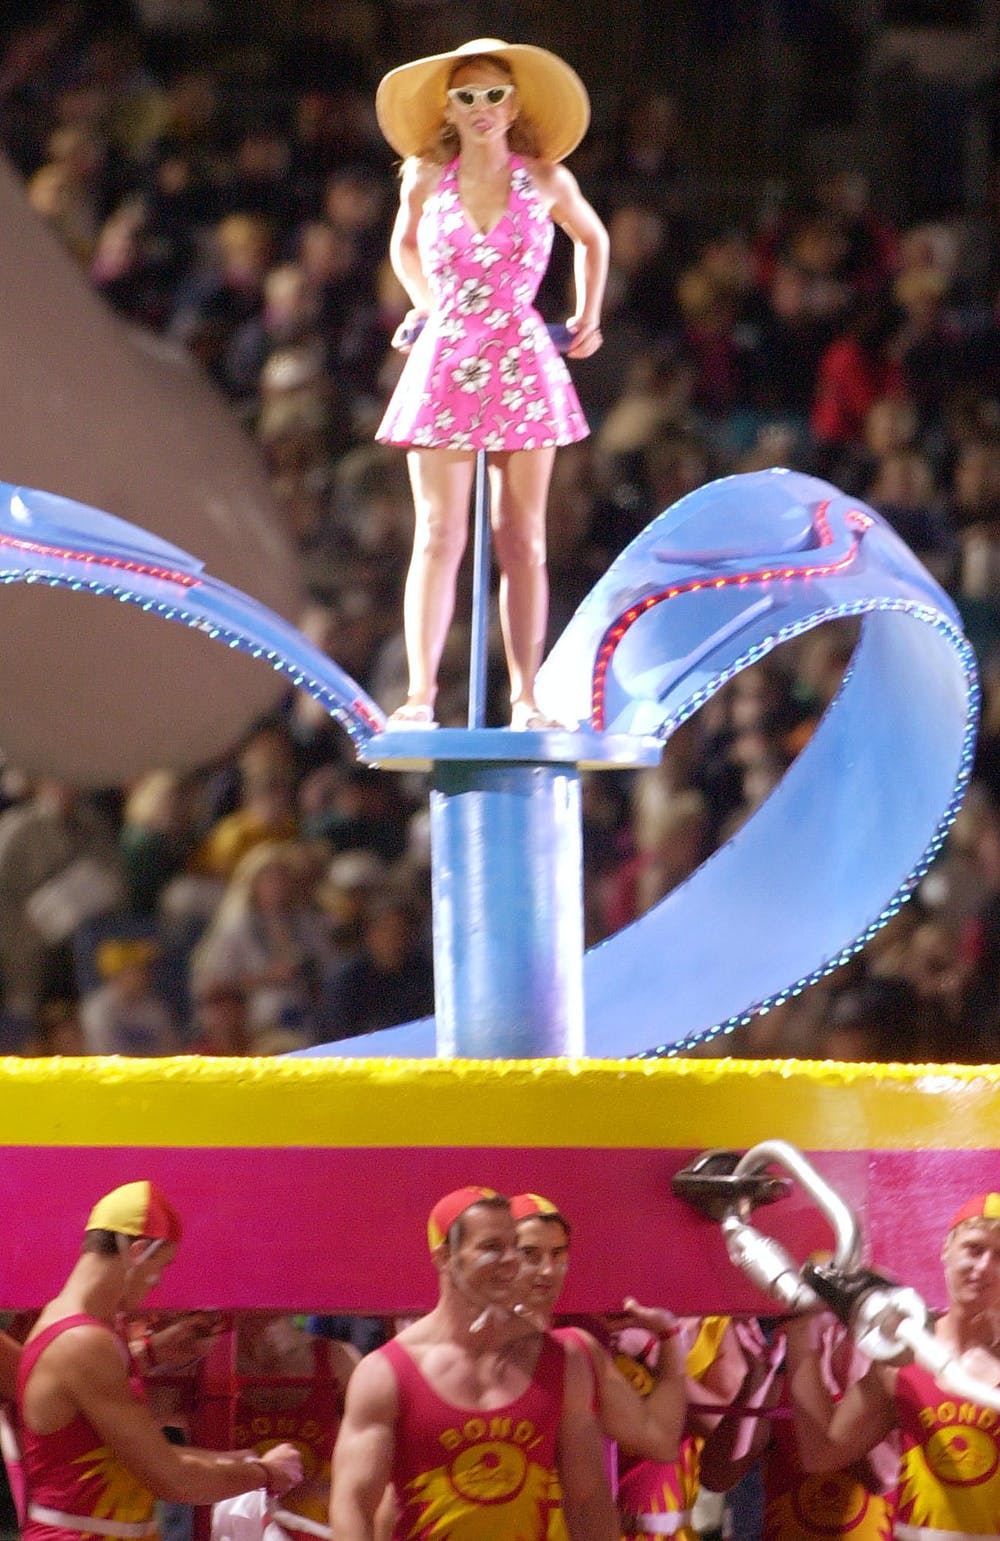 Kylie Minogue in thongs at the 2000 Olympics.